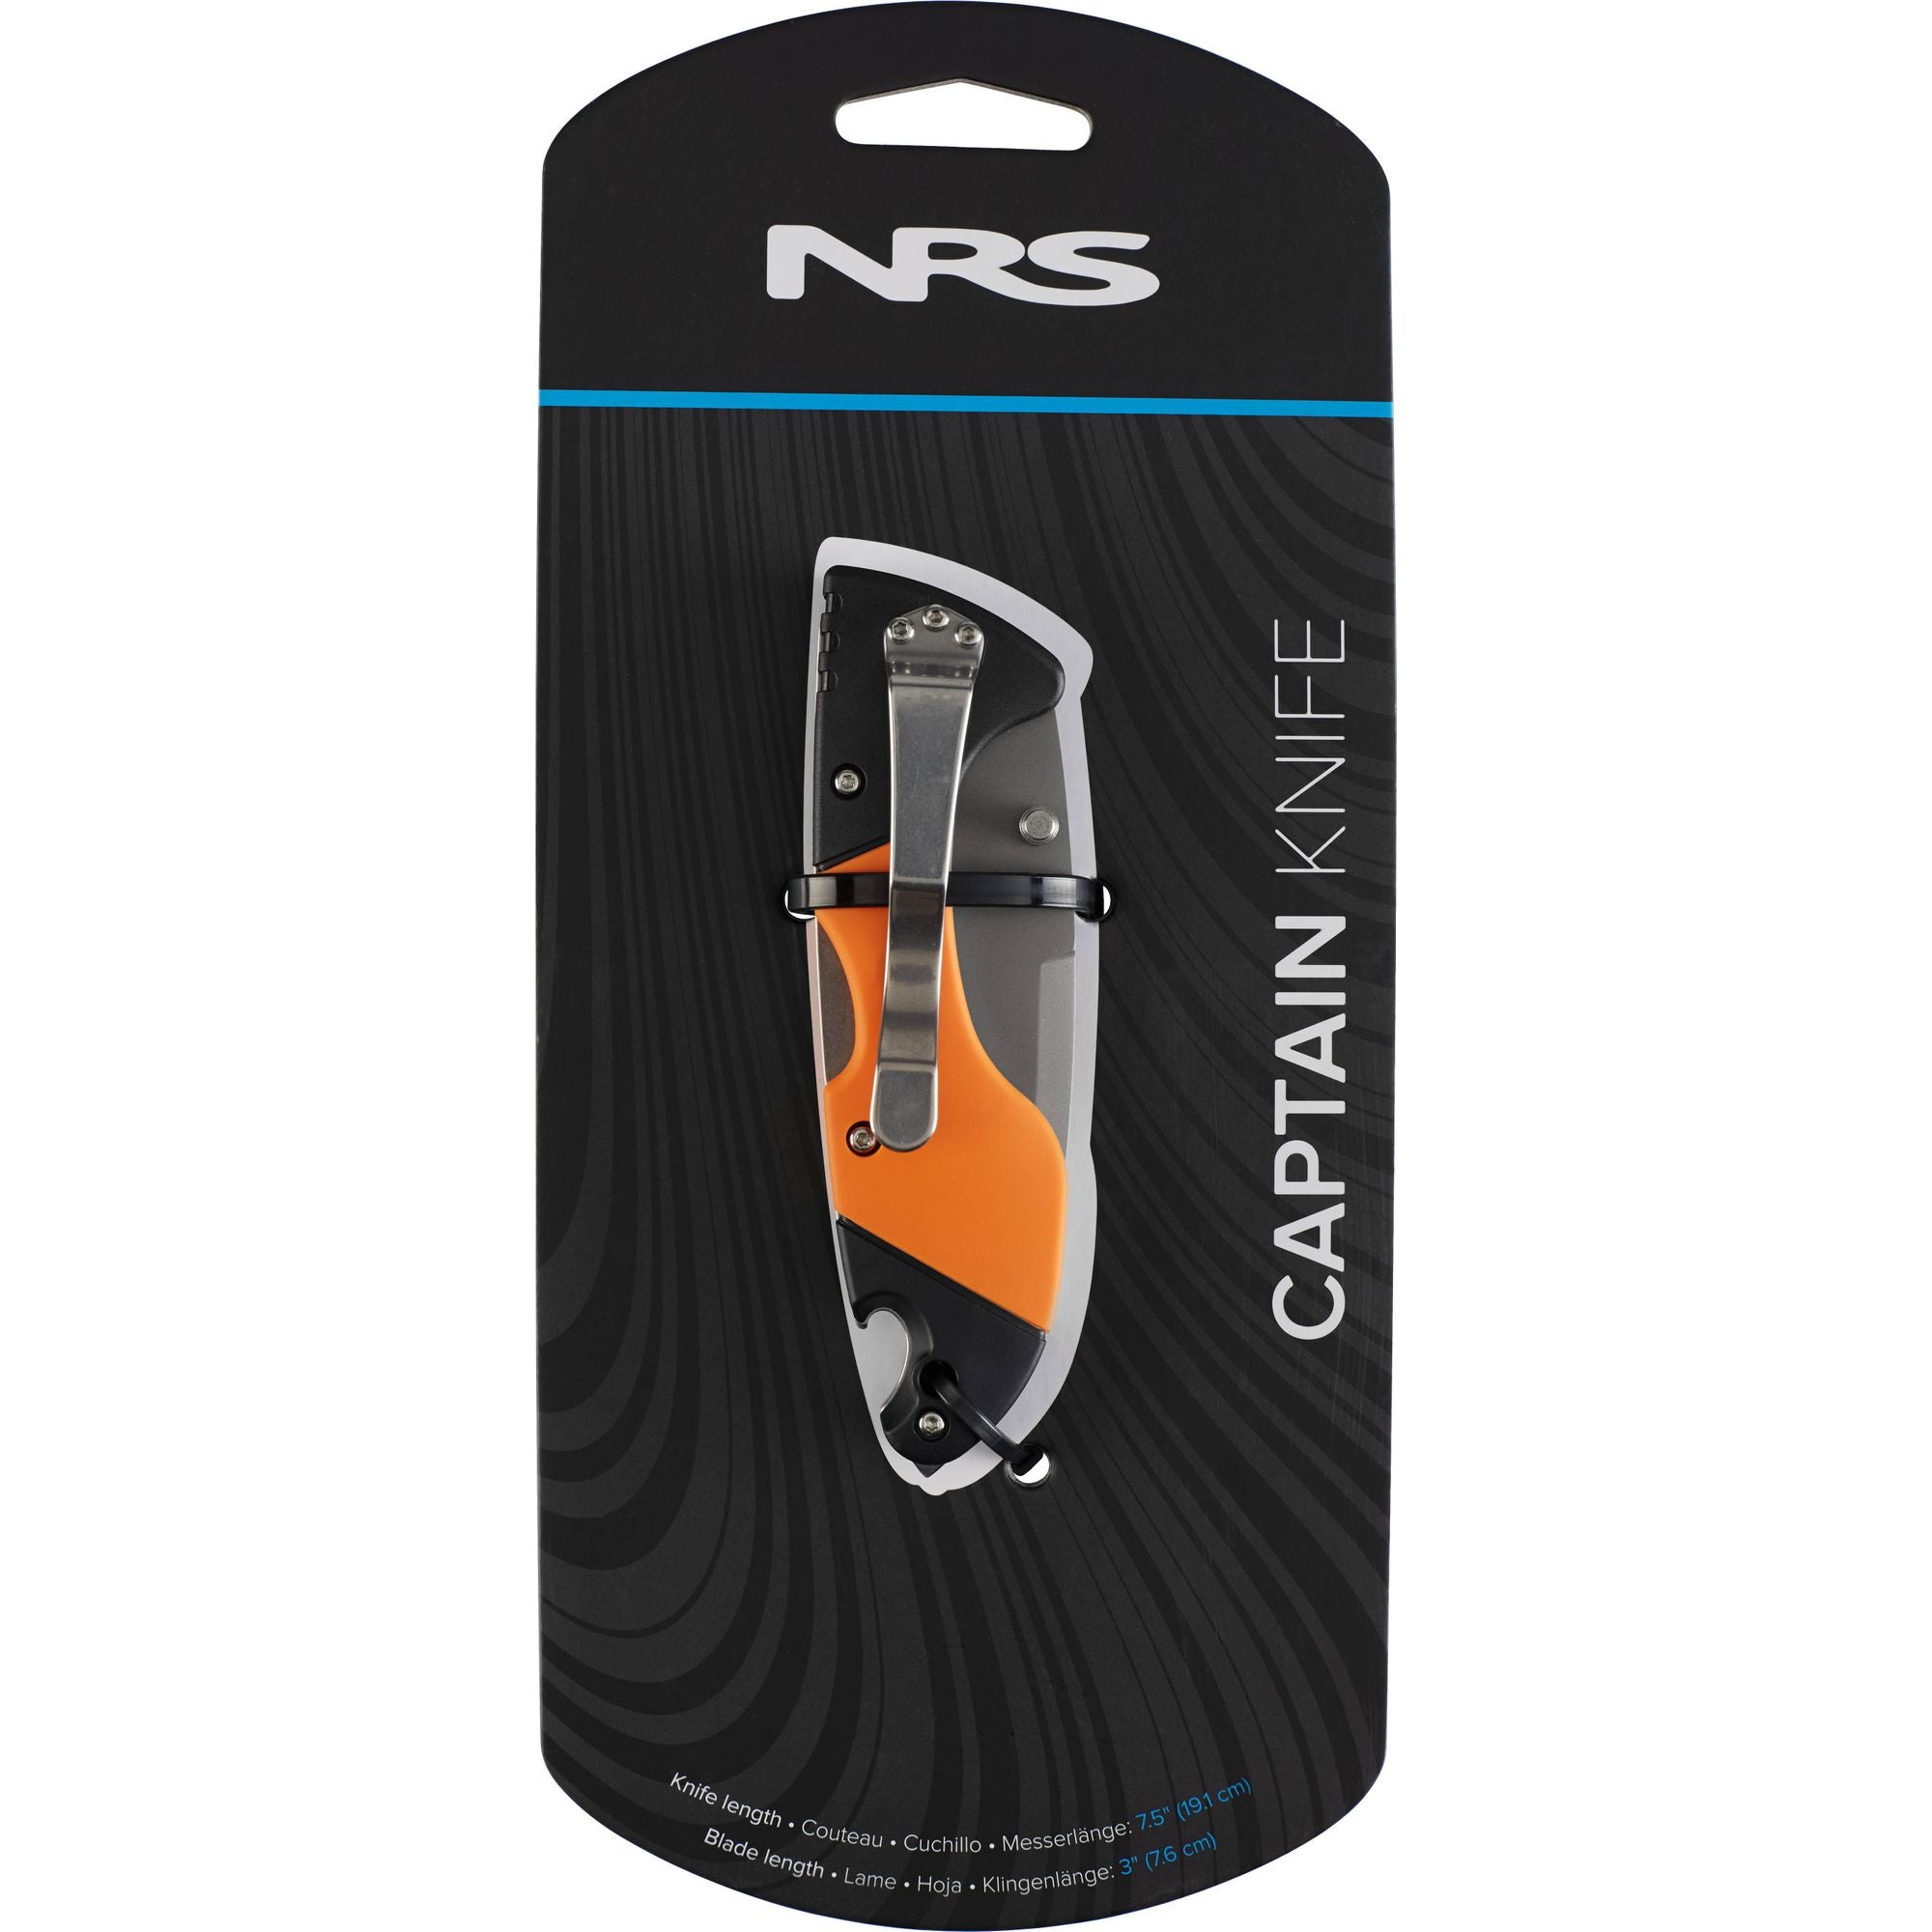 Overview of NRS Captain Rescue Knife 